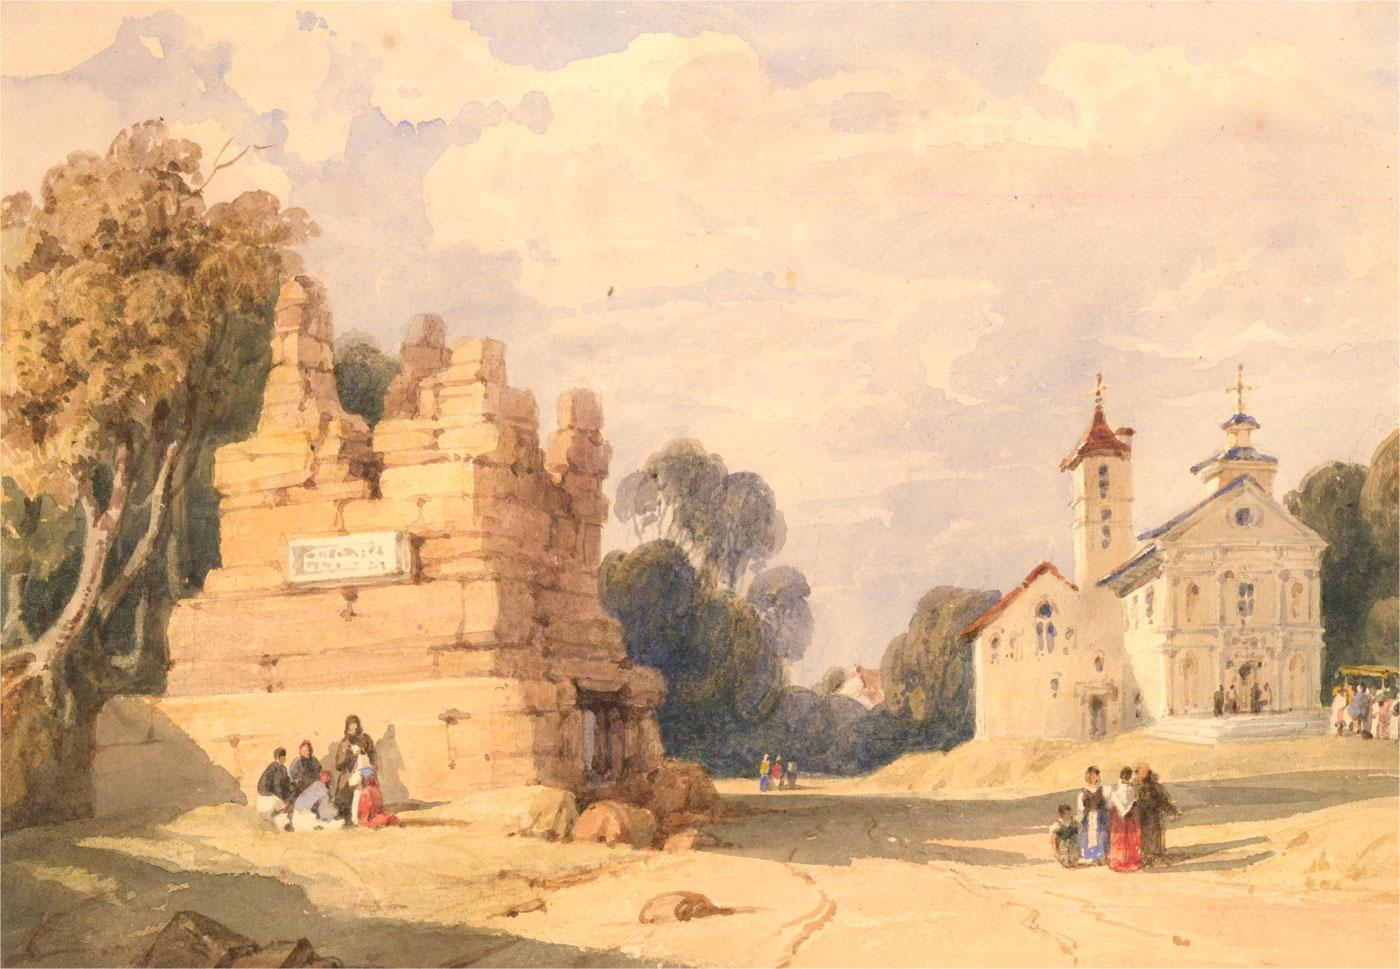 Unknown Landscape Art - Mid 19th Century Watercolour - Church and Ruins